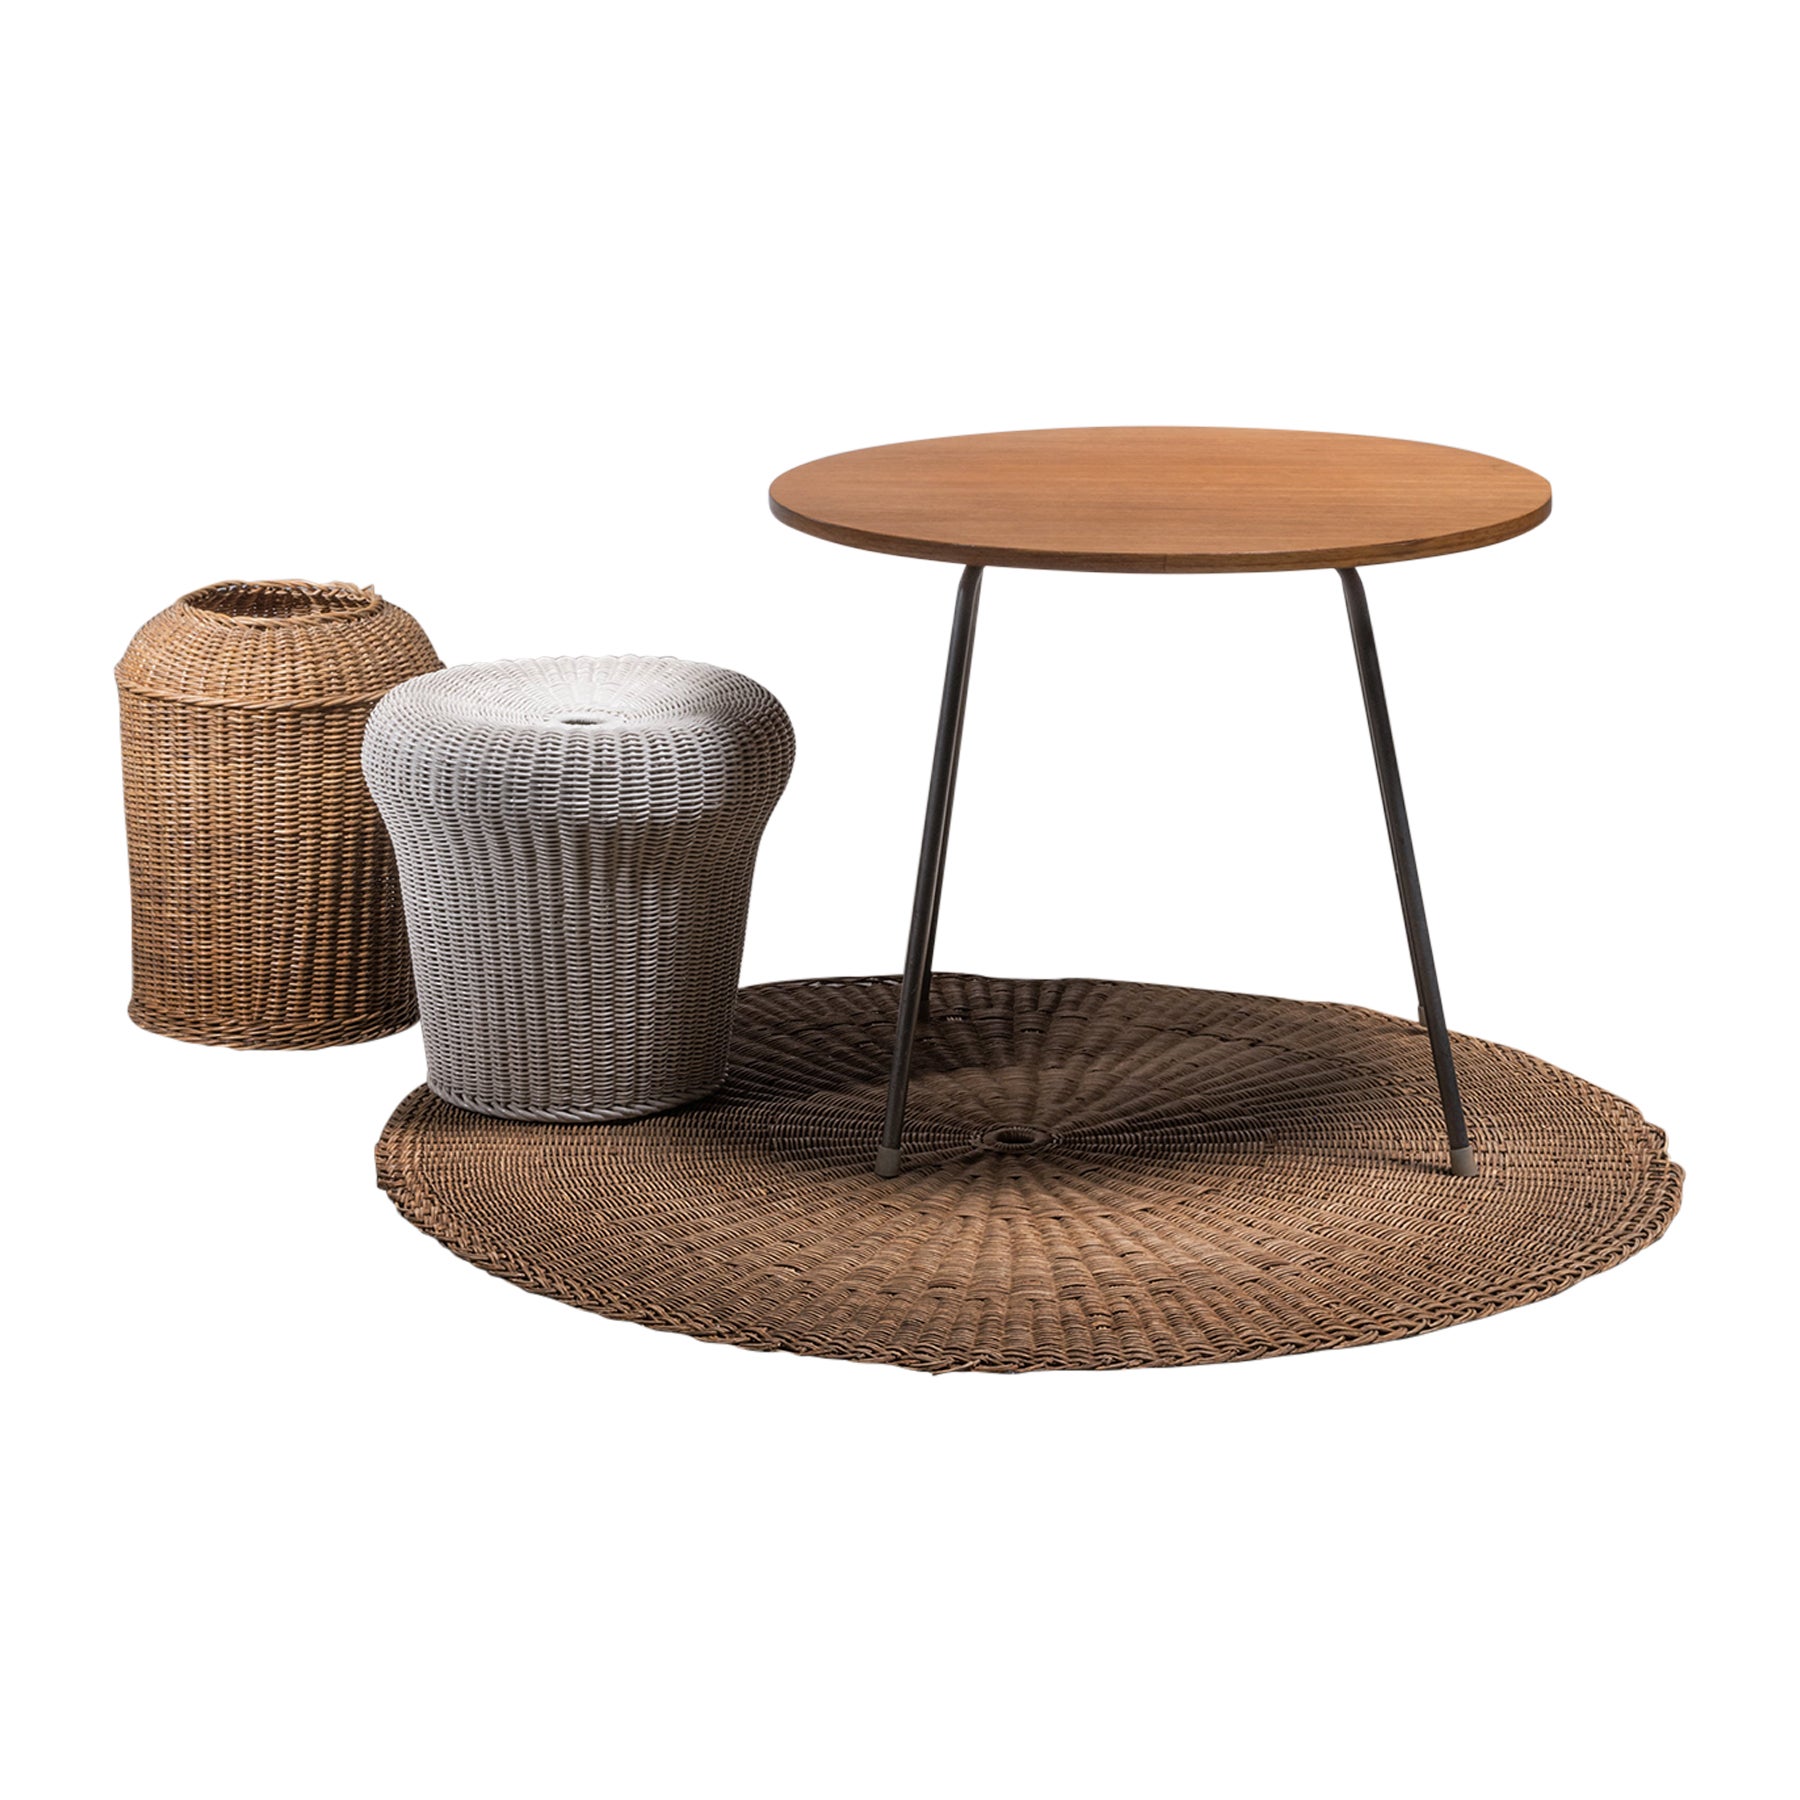 Egon Eiermann table with wicker basket and floor mat For Sale